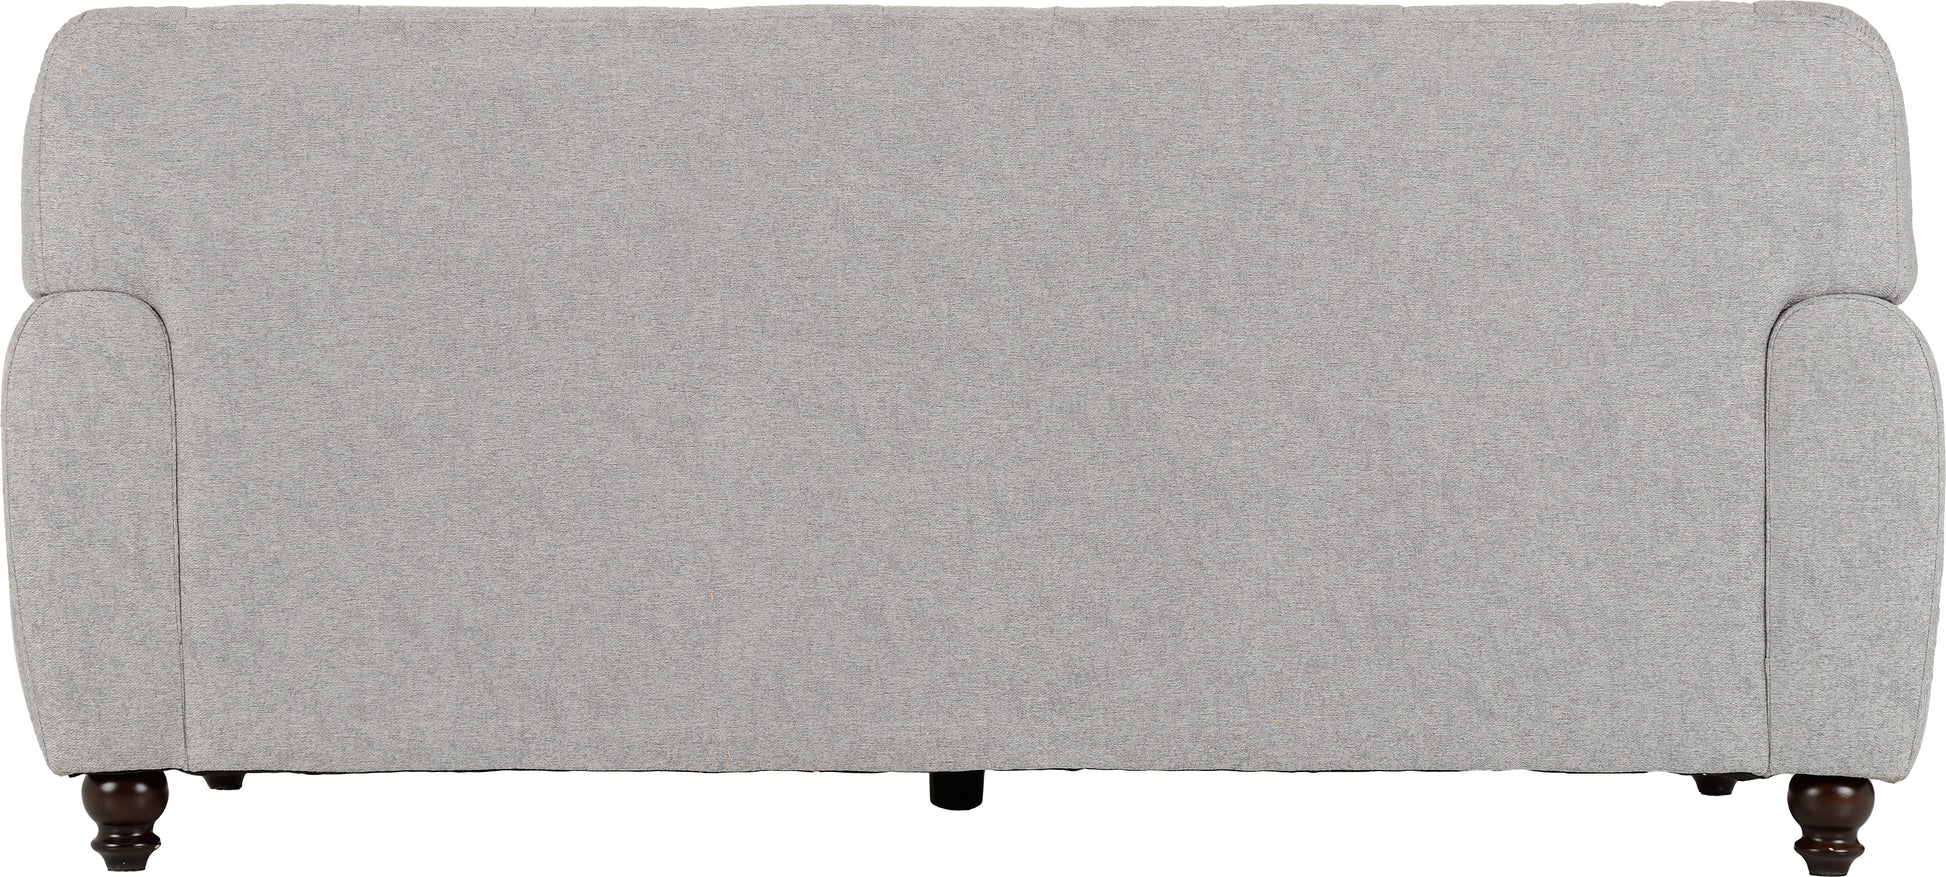 Chester 3+2 Suite - Light Grey Fabric